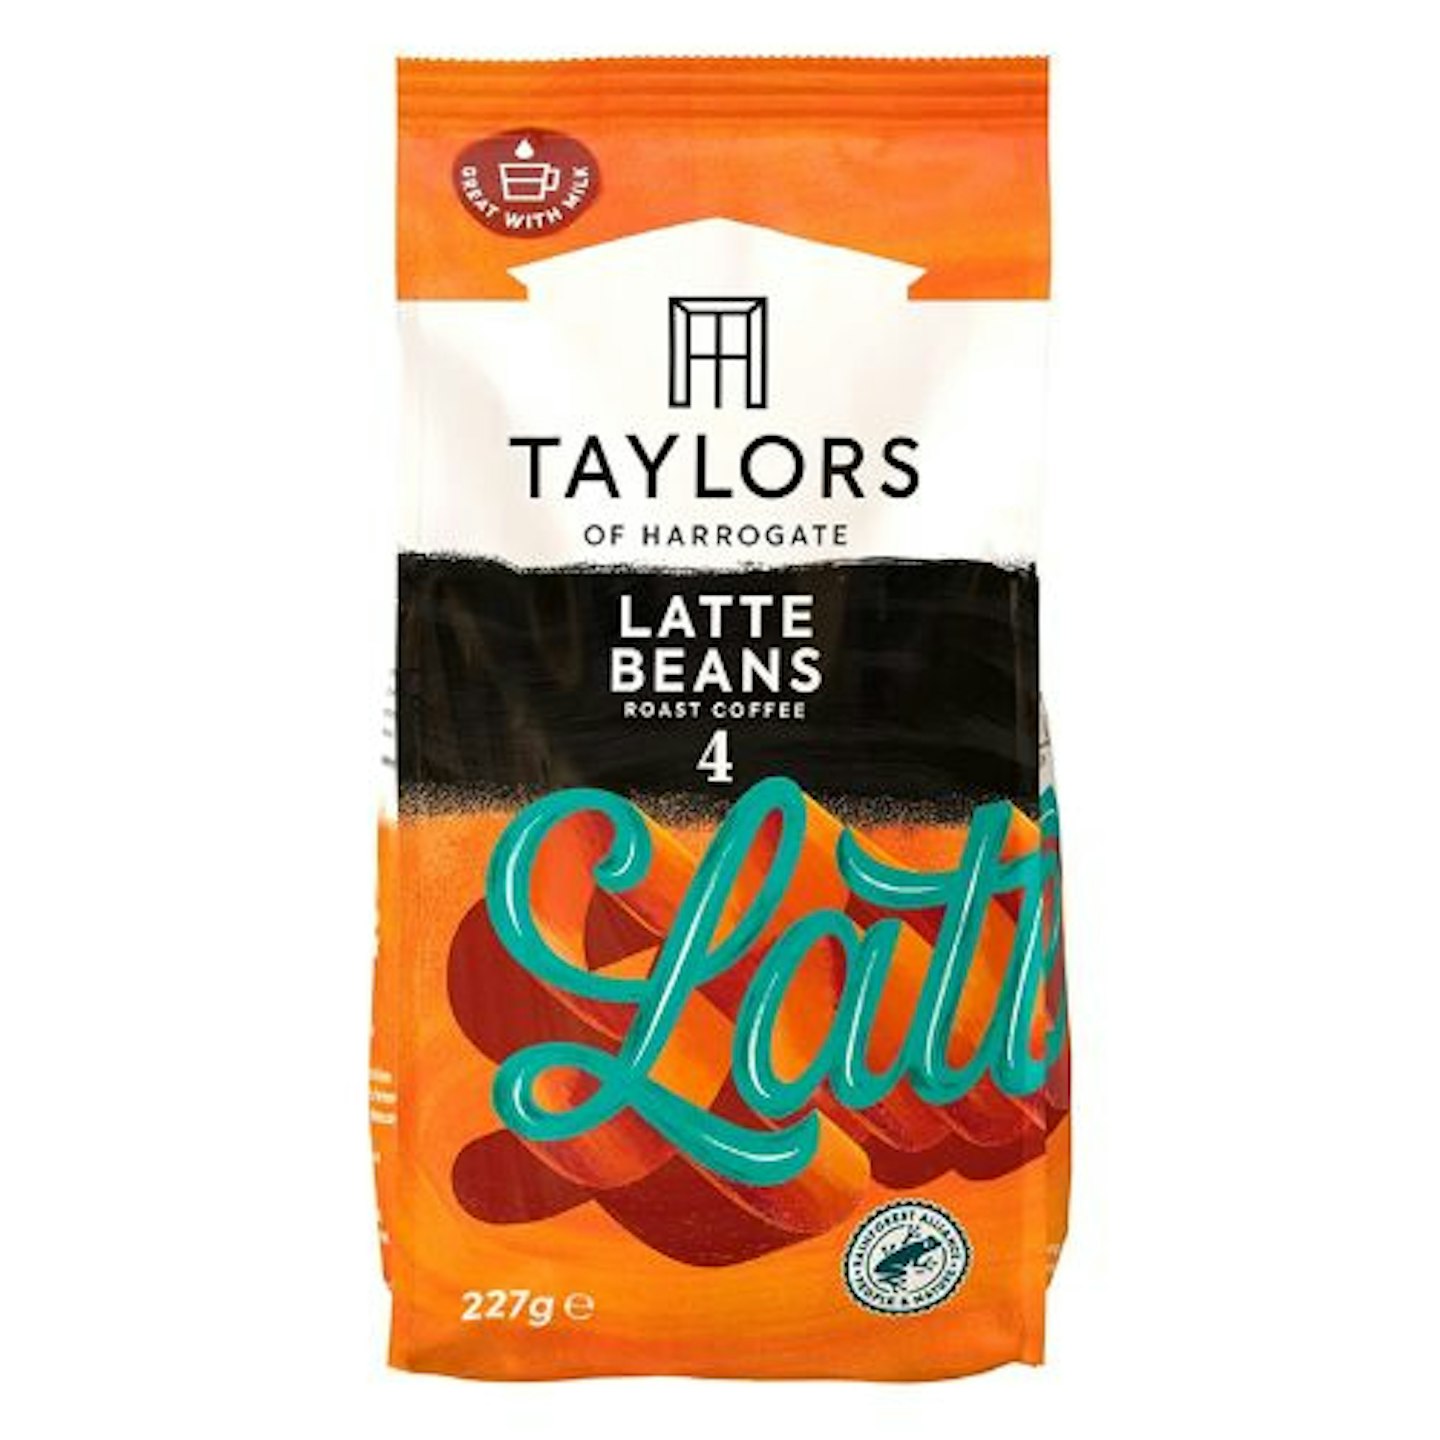 Taylors of Harrogate, Especially for Latte, 227g